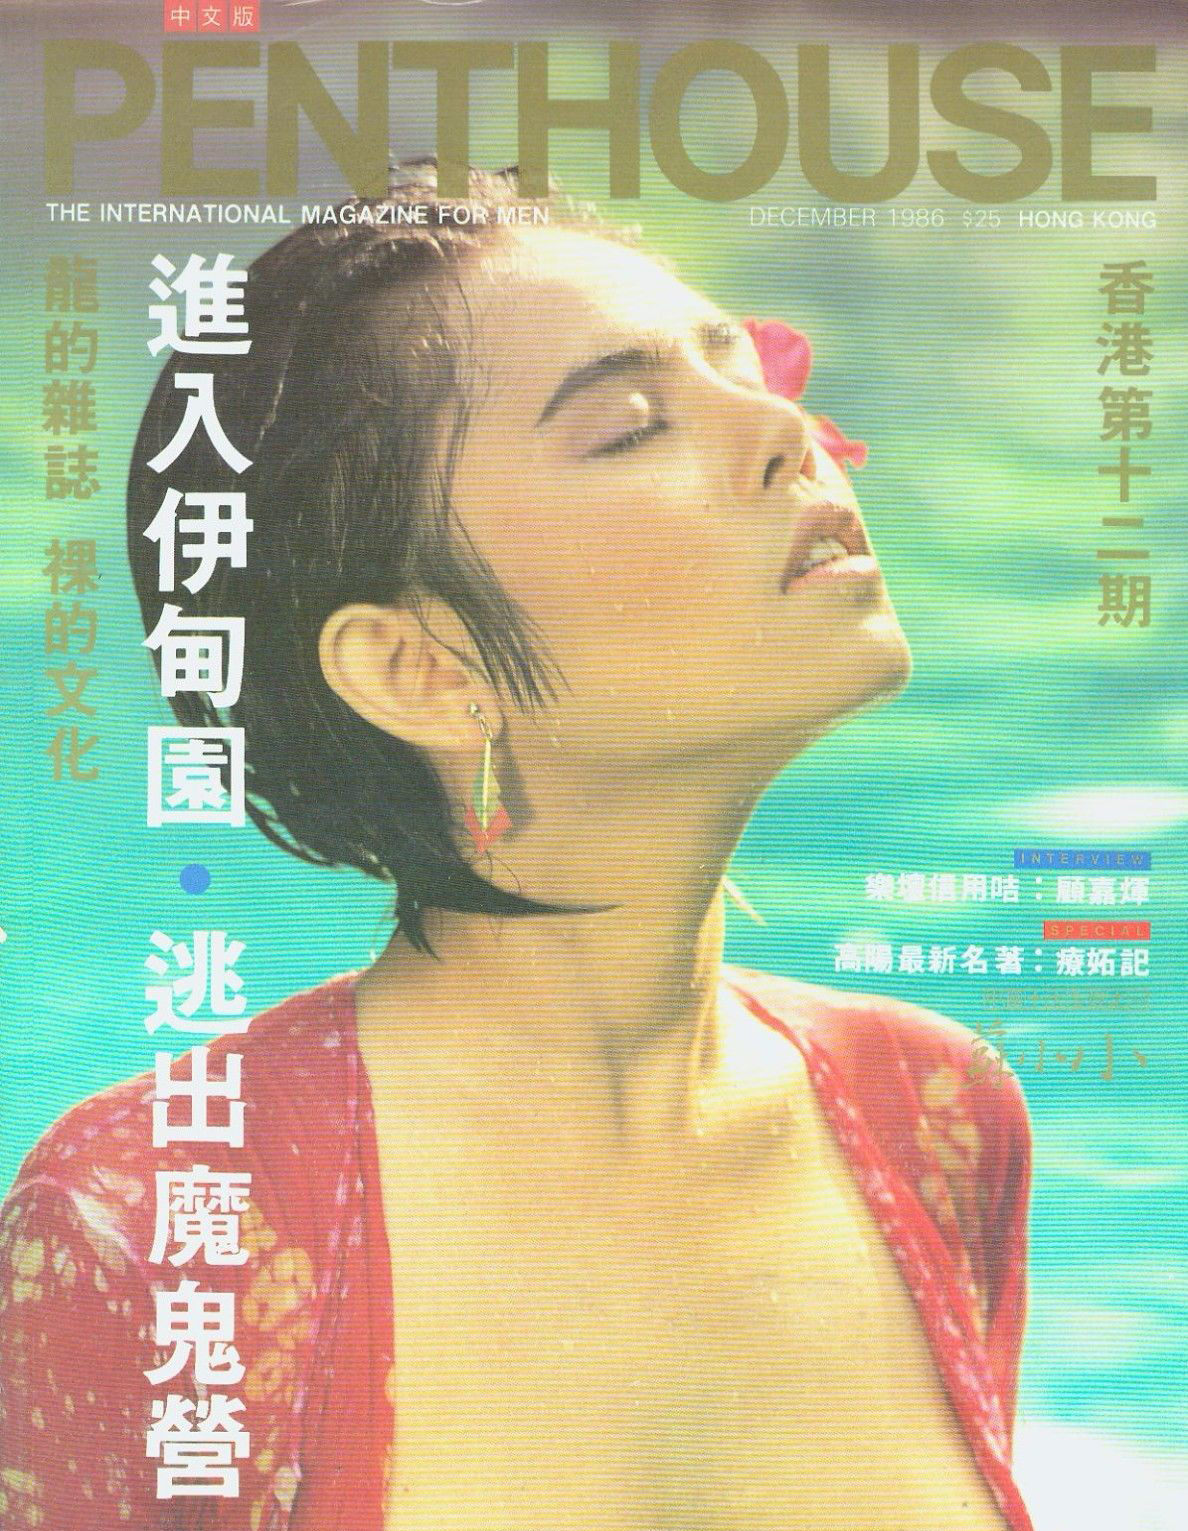 Penthouse (Hong Kong) December 1986, Penthouse (Hong Kong) December 1986 Magazine Back Issue Published by Penthouse Publishing, Bob Guccione. The International Magazine For Men., The International Magazine For Men